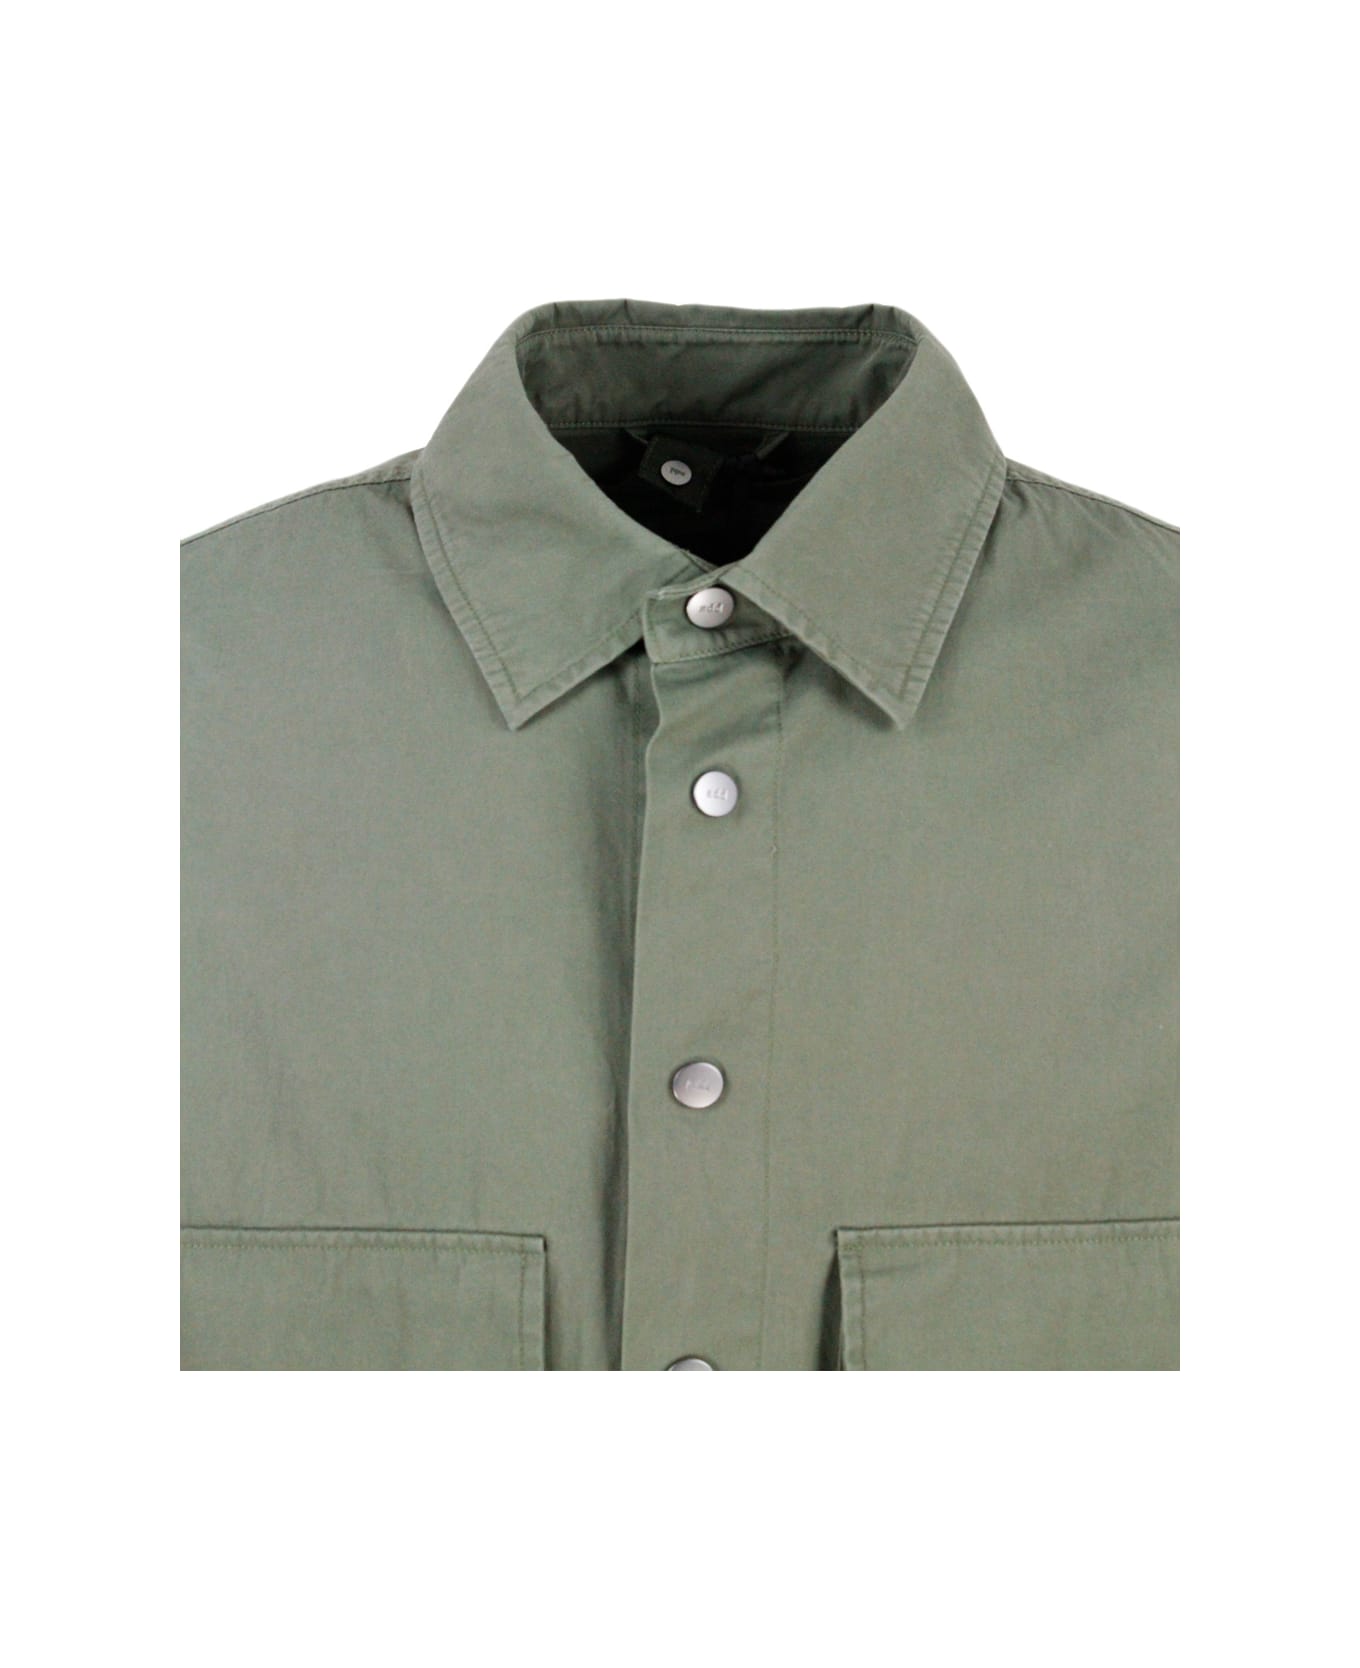 Add Recycled Nylon Shirt Jacket With Detachable Internal Padded Vest. - Military ジャケット